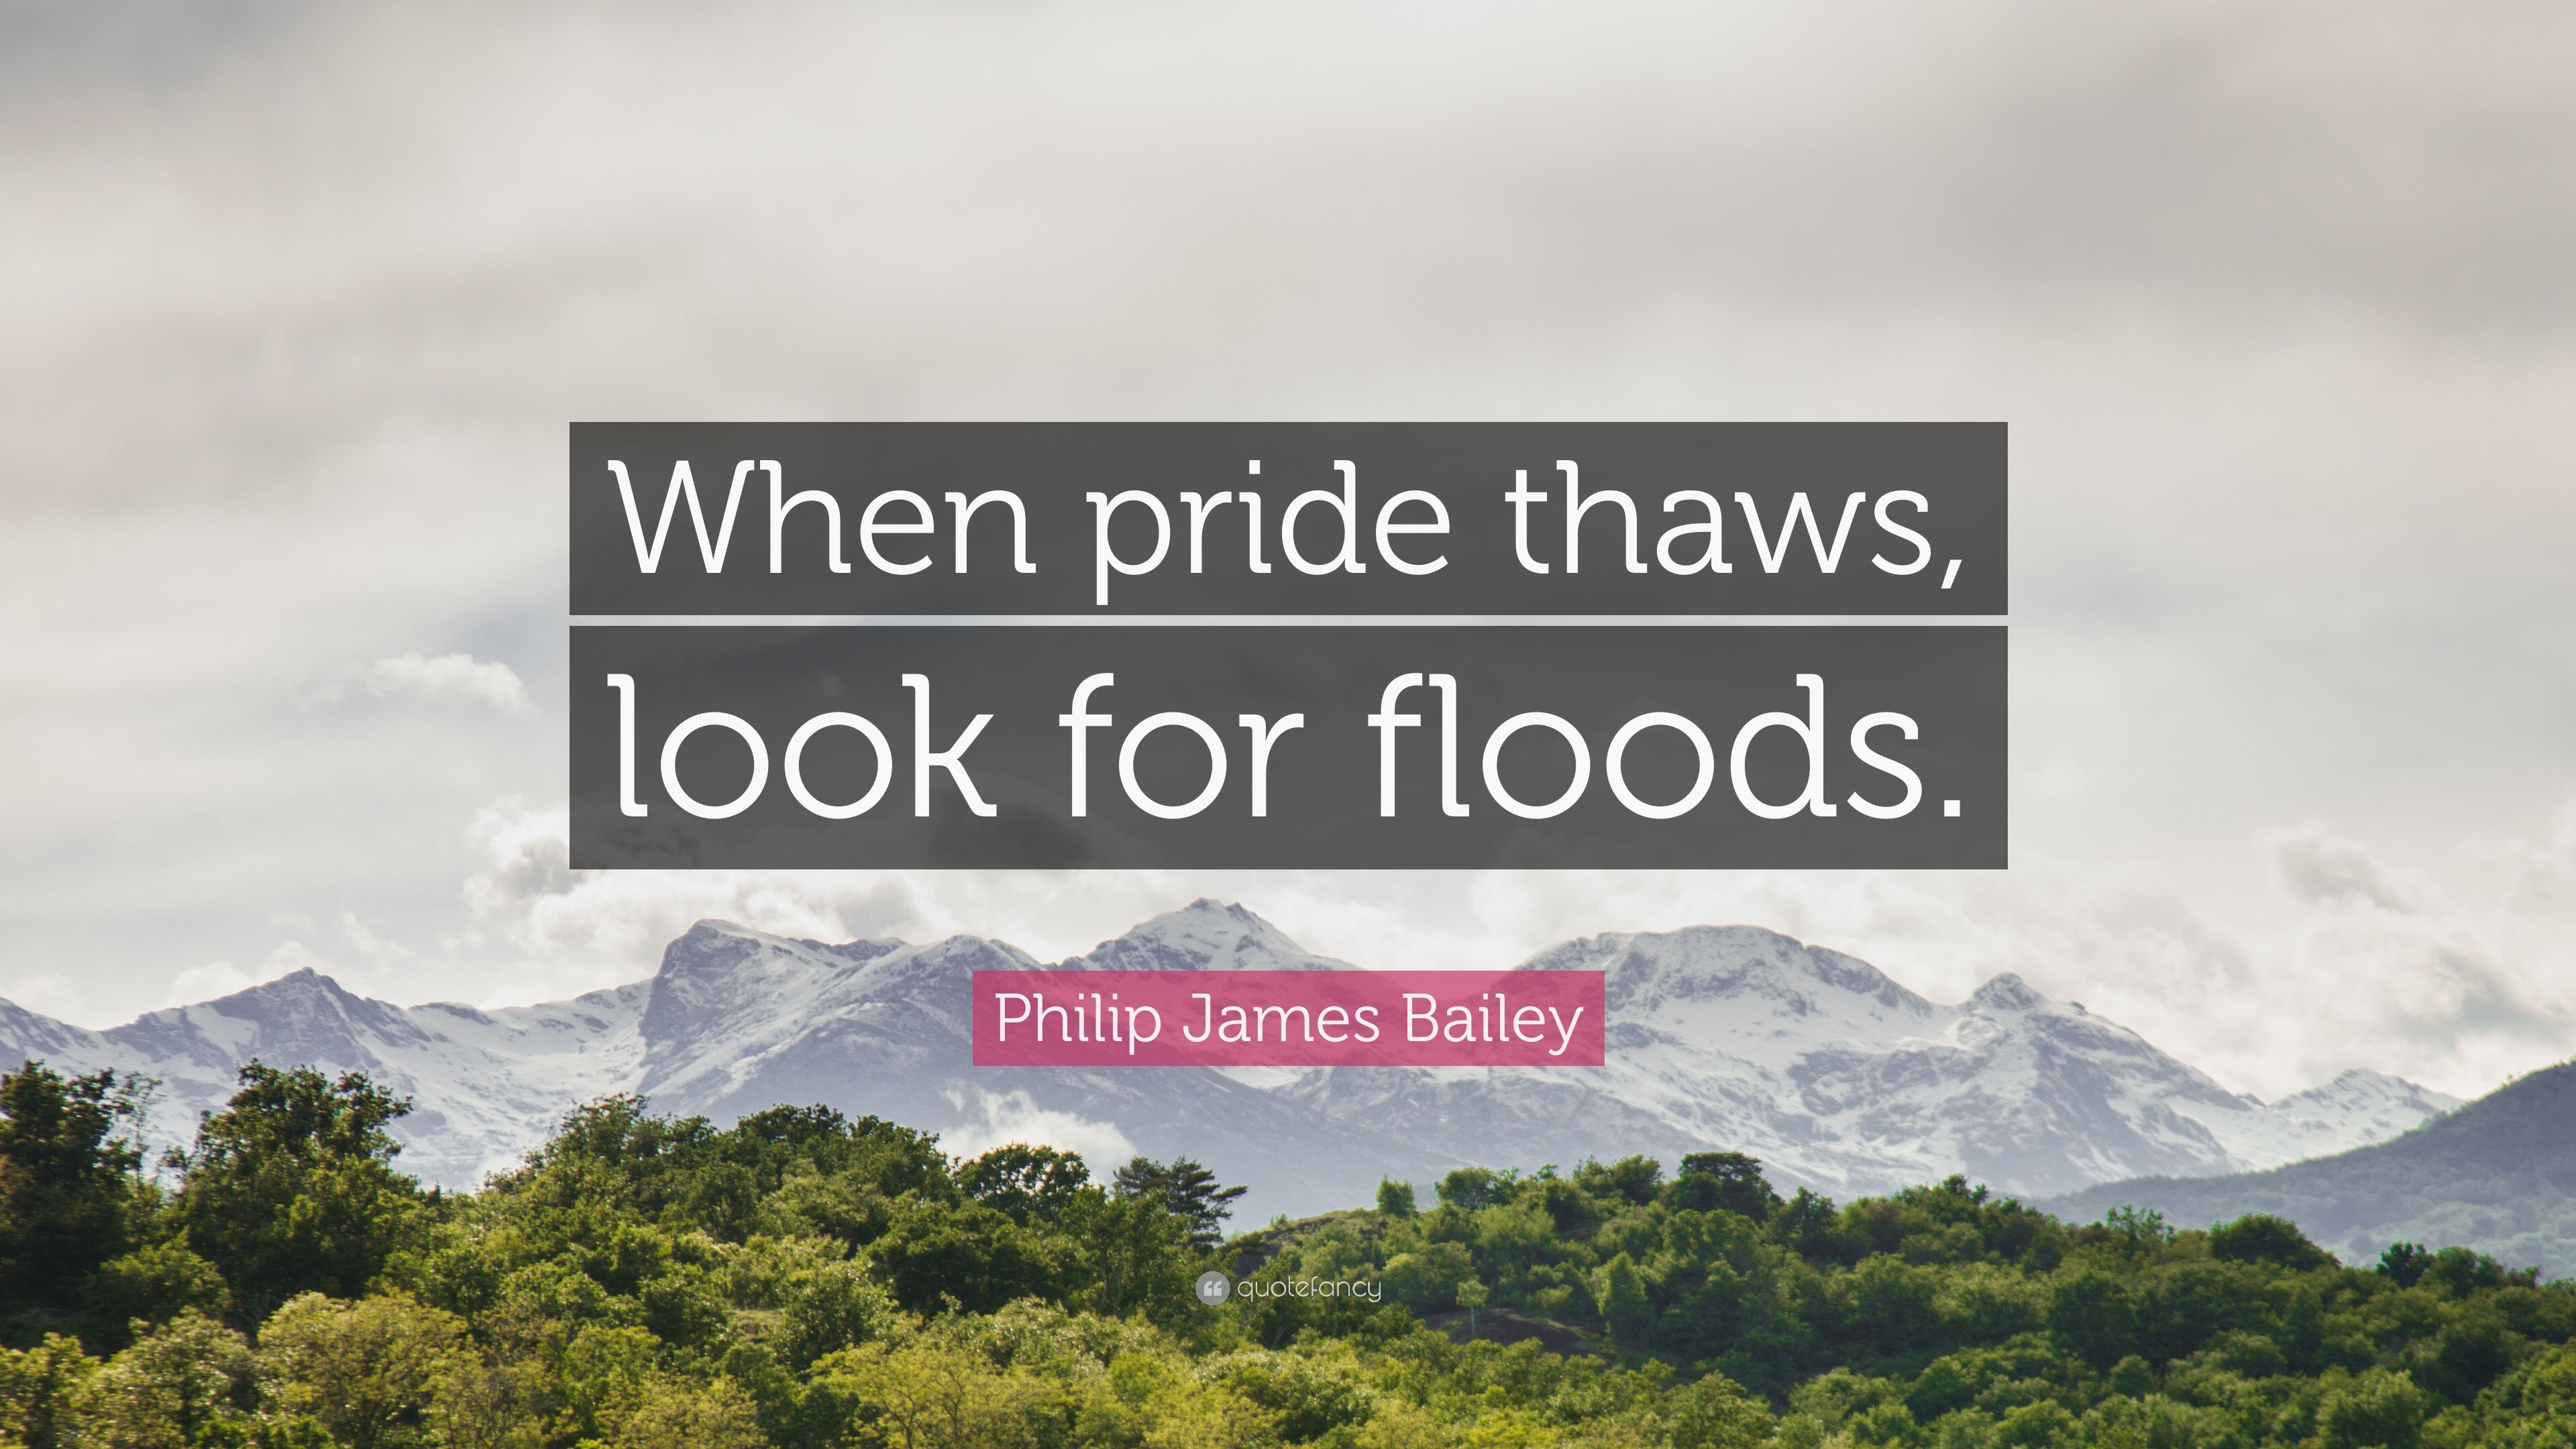 Philip James Bailey Quote: “When pride thaws, look for floods.” 7